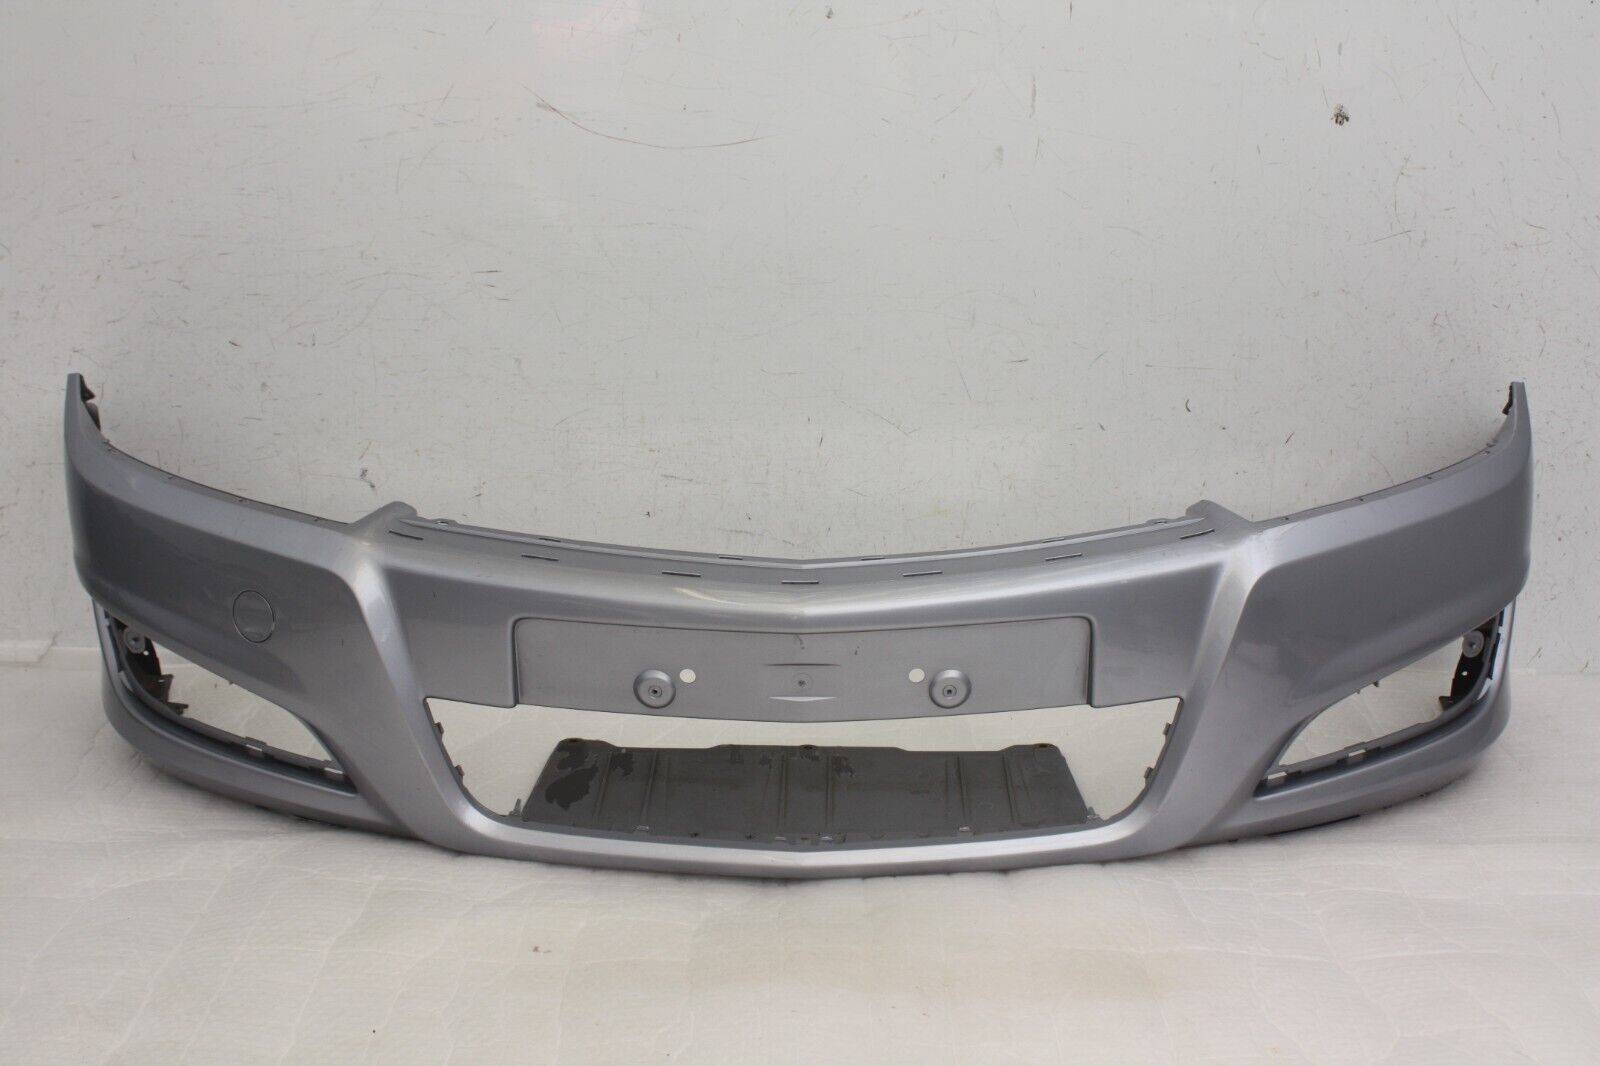 Vauxhall-Astra-H-Front-Bumper-2007-TO-2009-13225746-Genuine-DAMAGED-176333456194